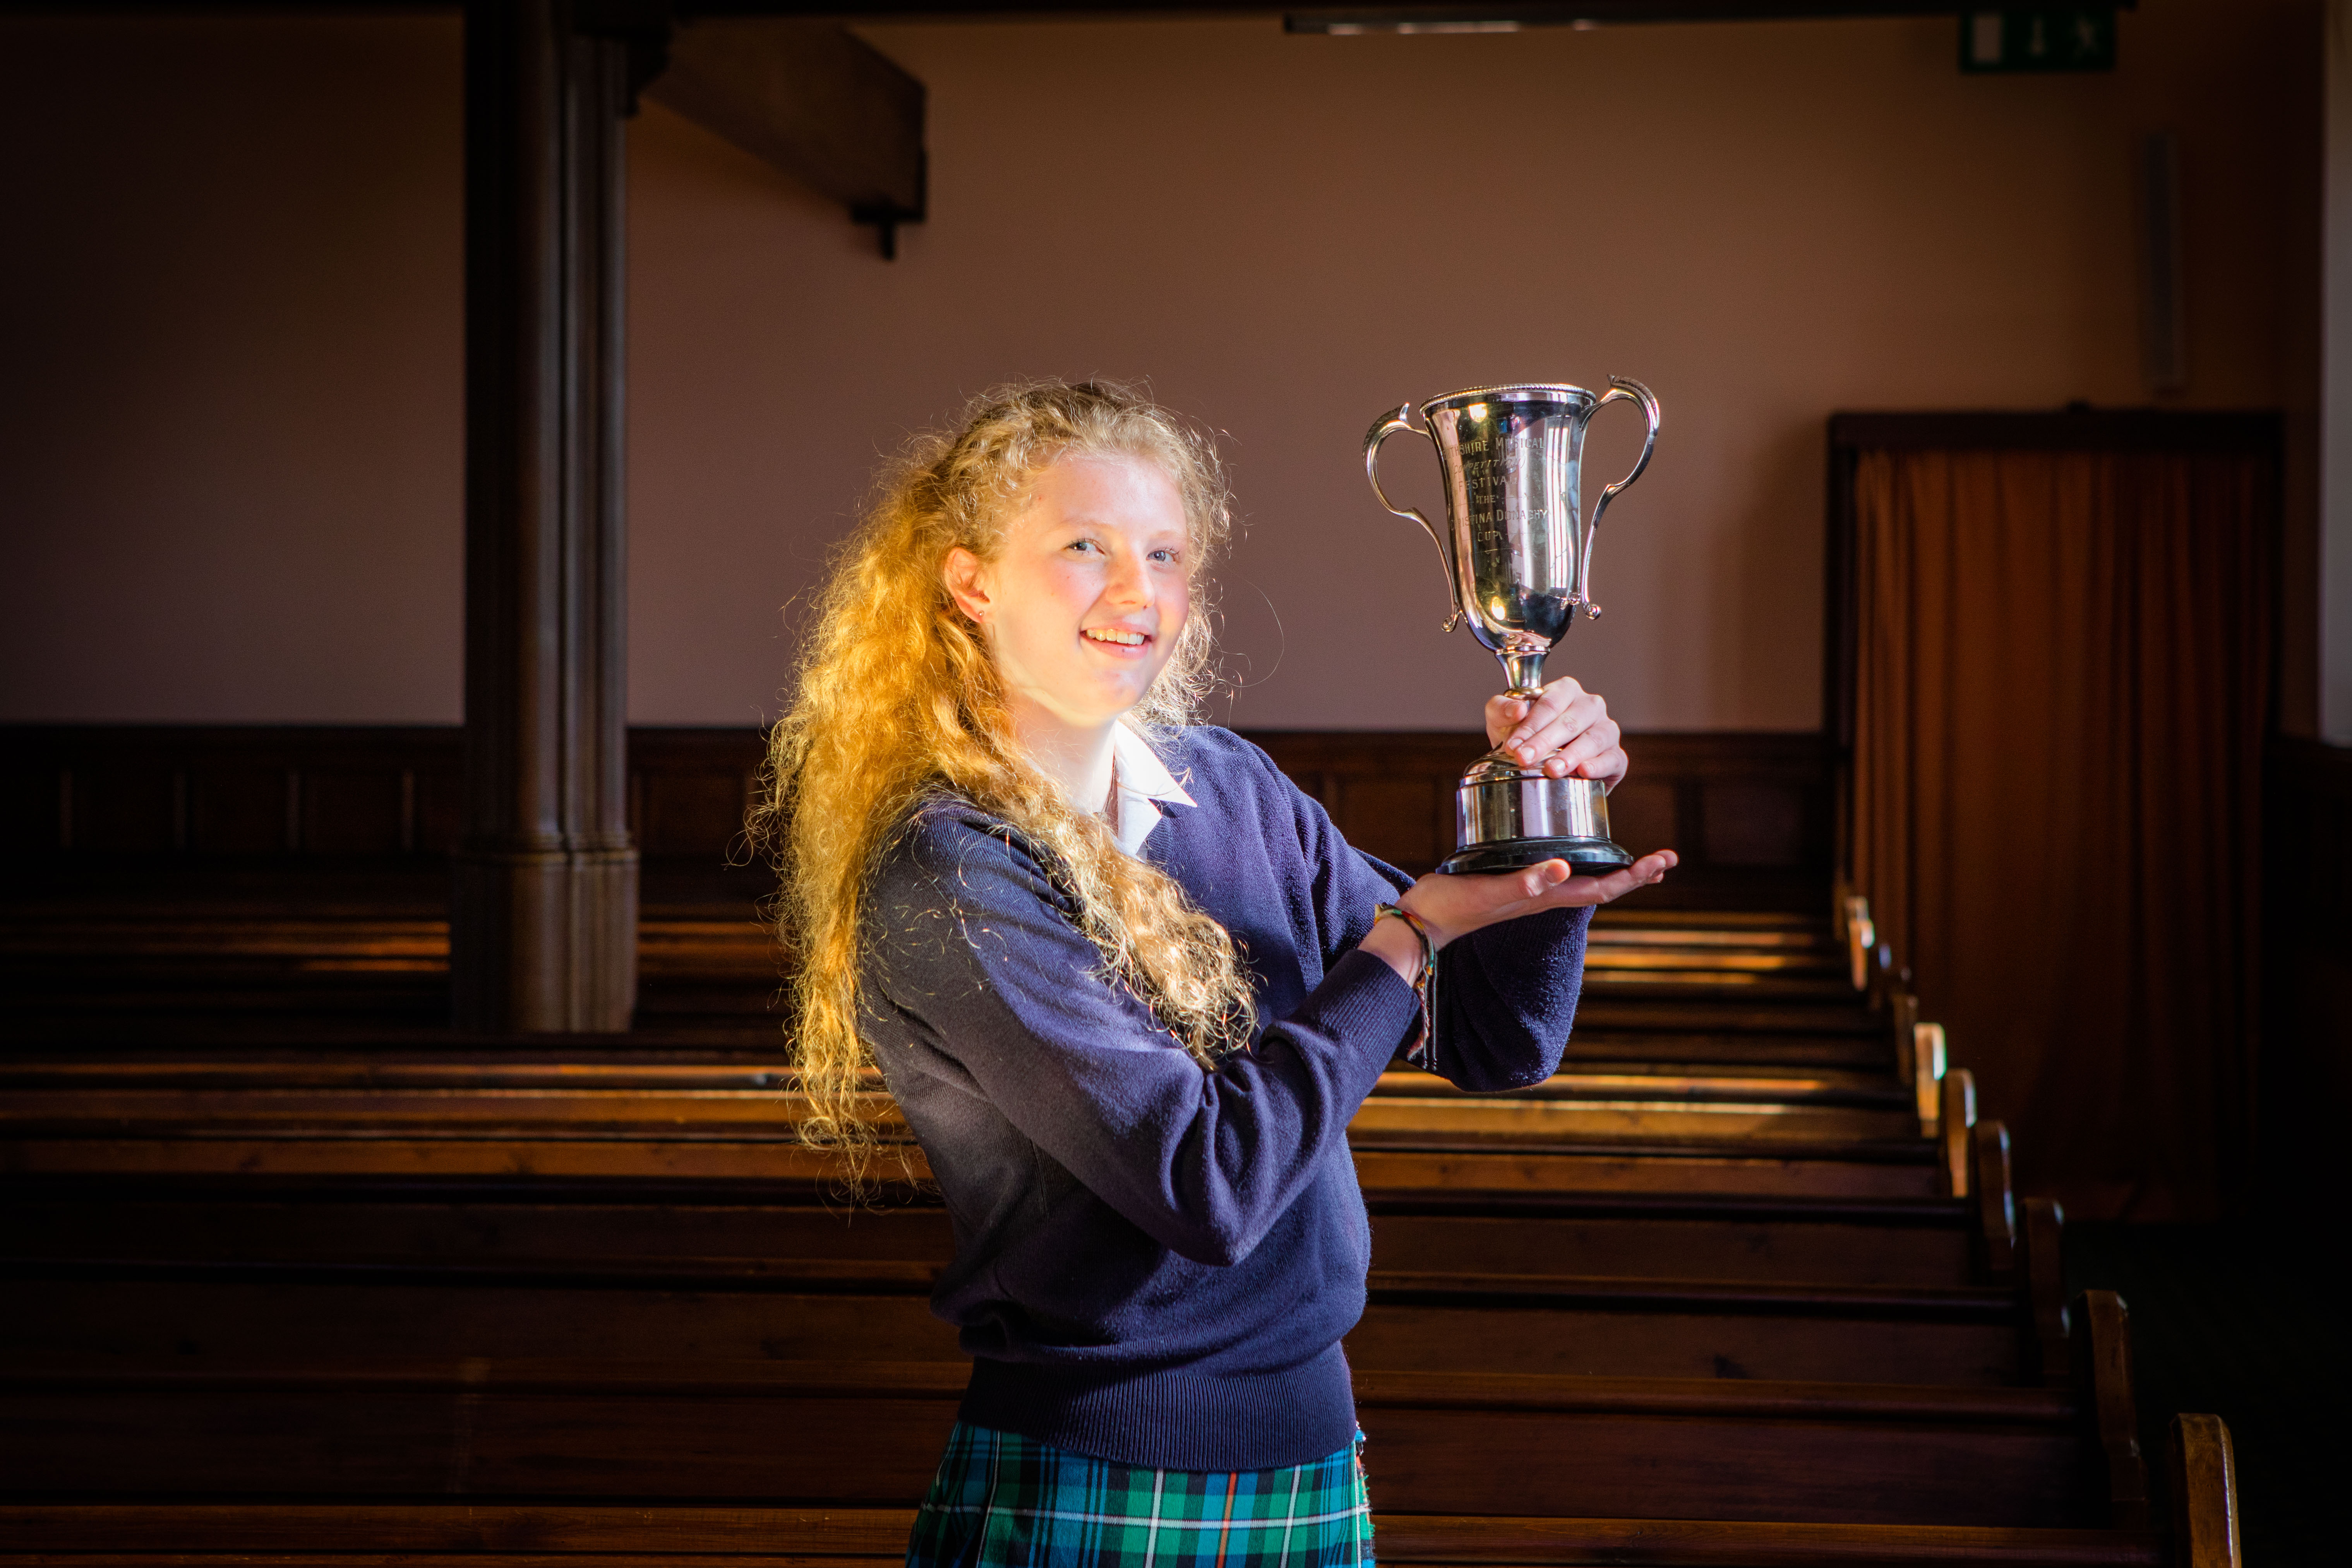 Abigail Strickland of Glenalmond College won The Christine Donaghy Cup for the Vocal Solo, Girls aged 14 or 15 class